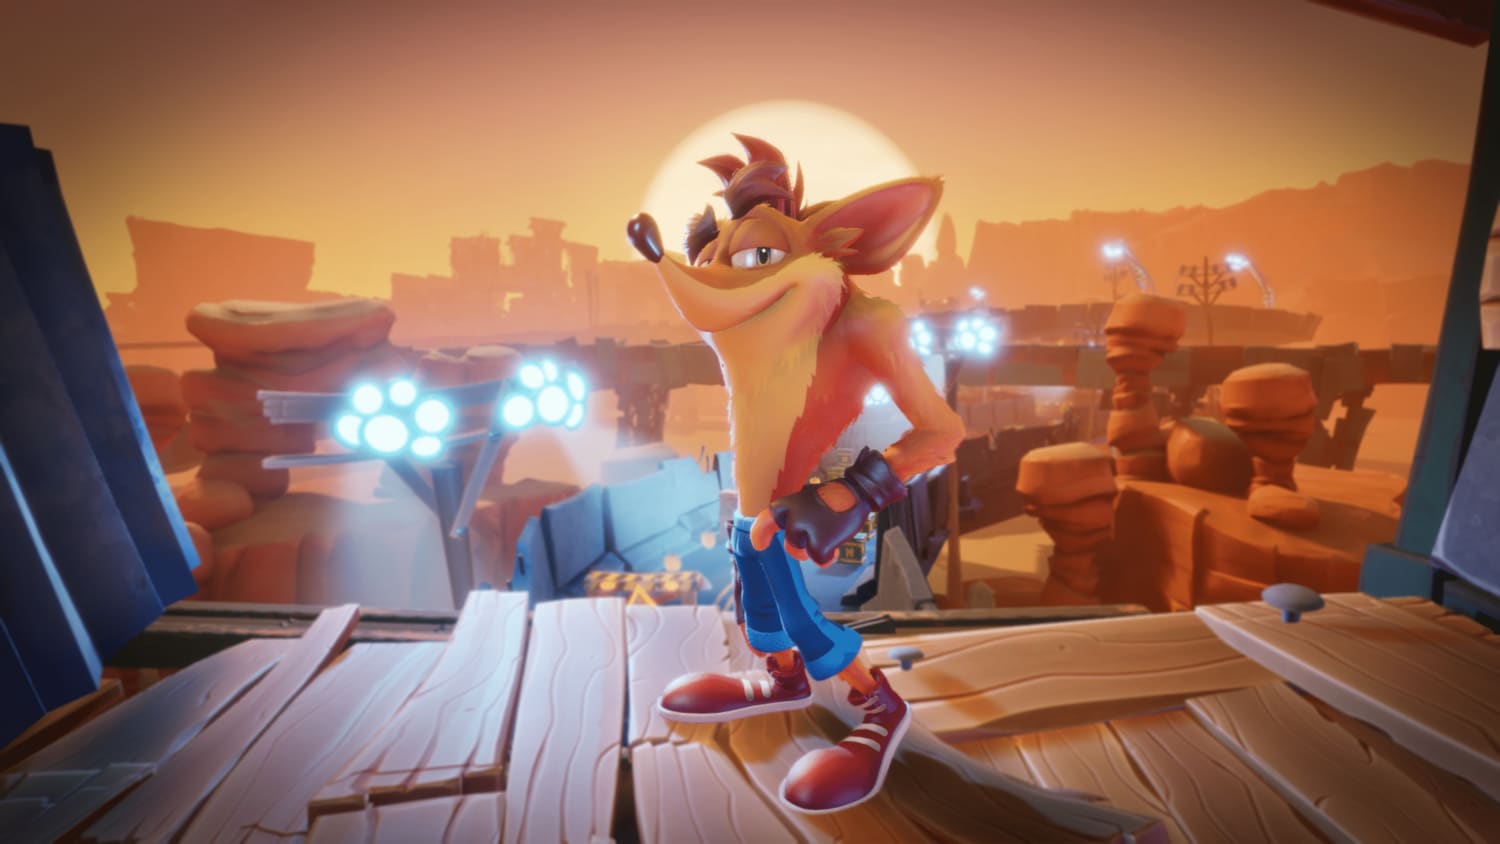 Crash Bandicoot 4: It's About Time Coming October 2nd